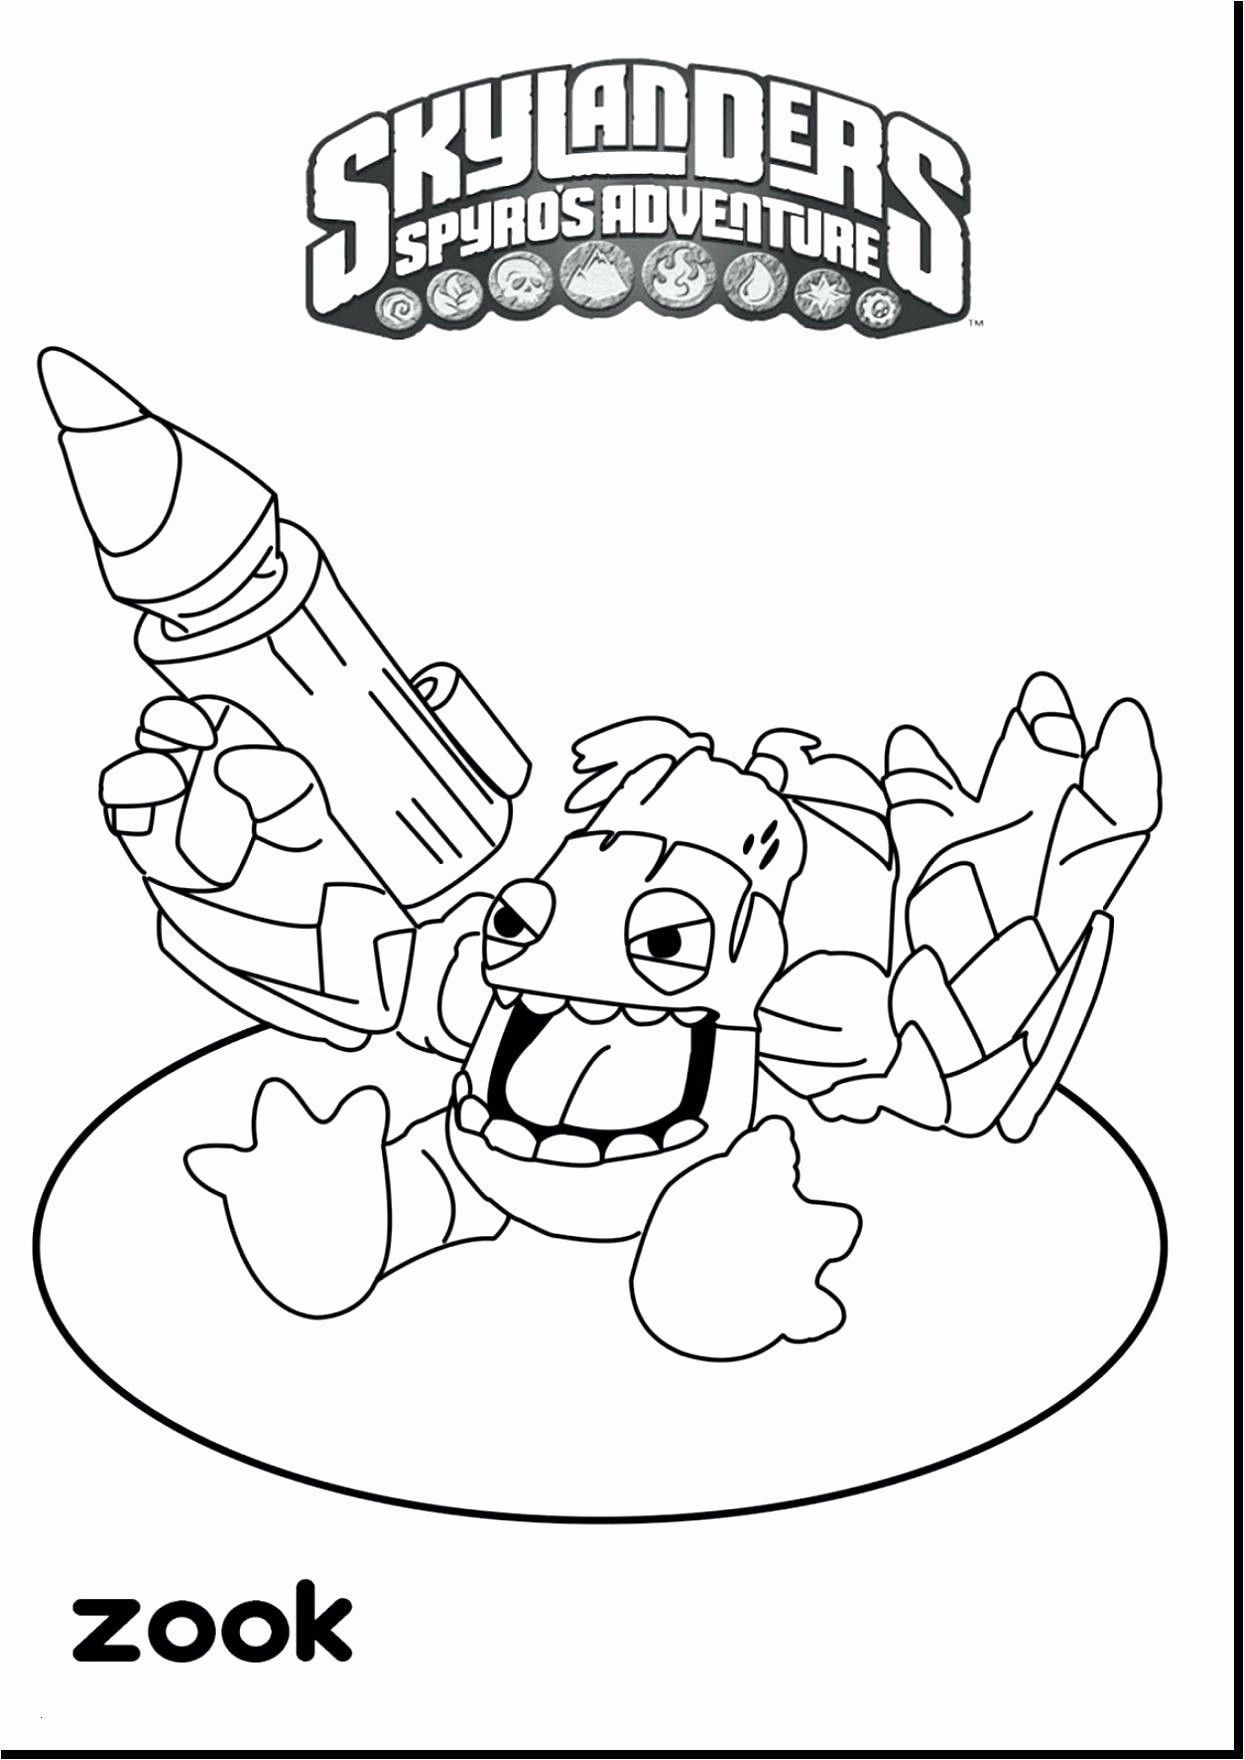 Sports Coloring Book Pages Lovely Free Coloring Pages Sports Jvzooreview